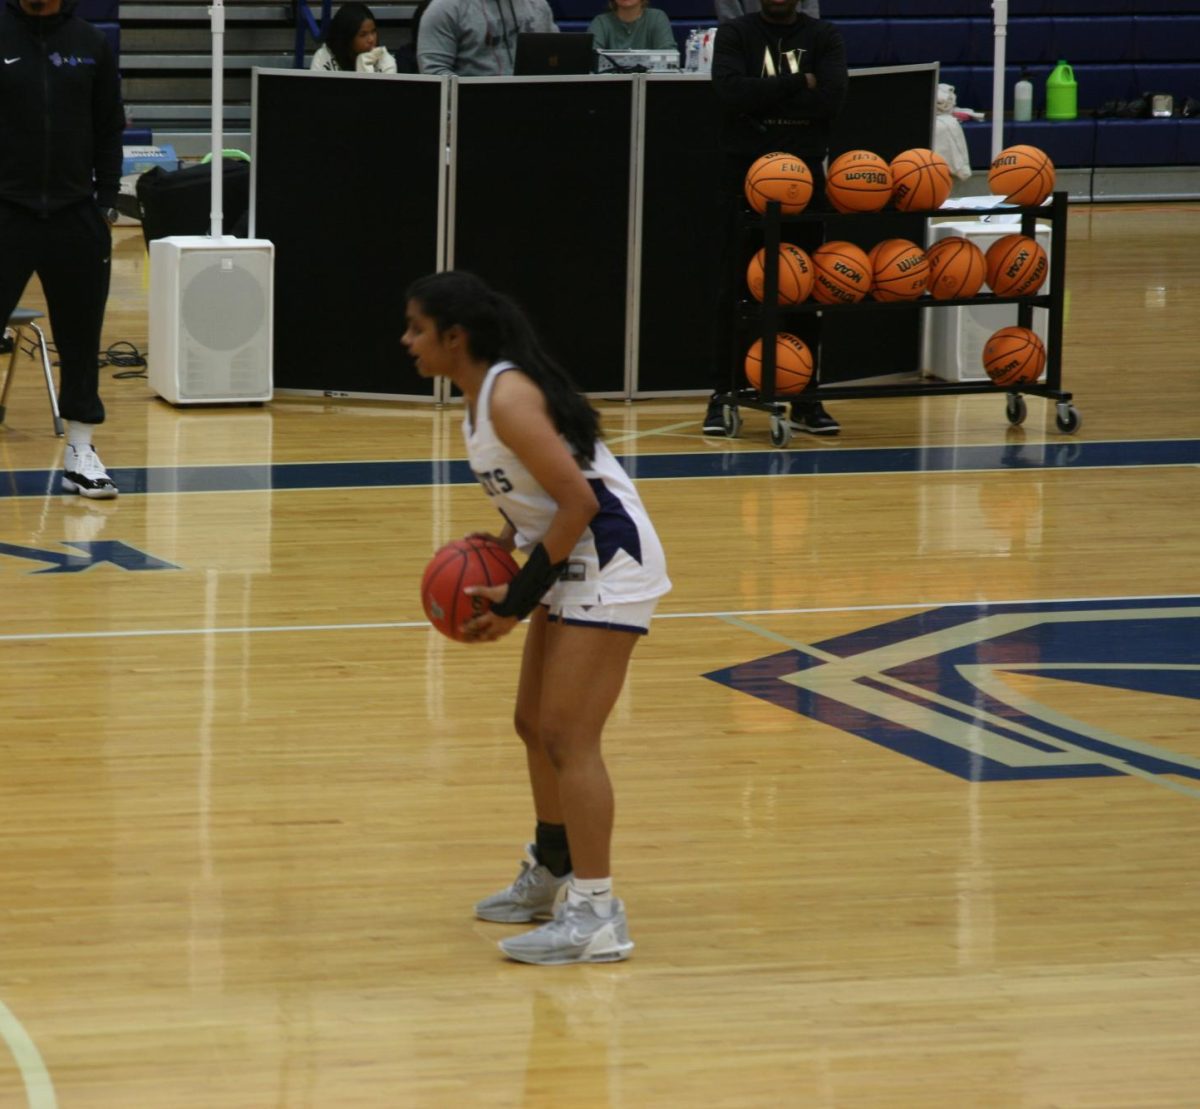 Anika Badatala is taking the ball up to court as she scores her third three pointer of the game. Playing guard, she helped lead her team to victory